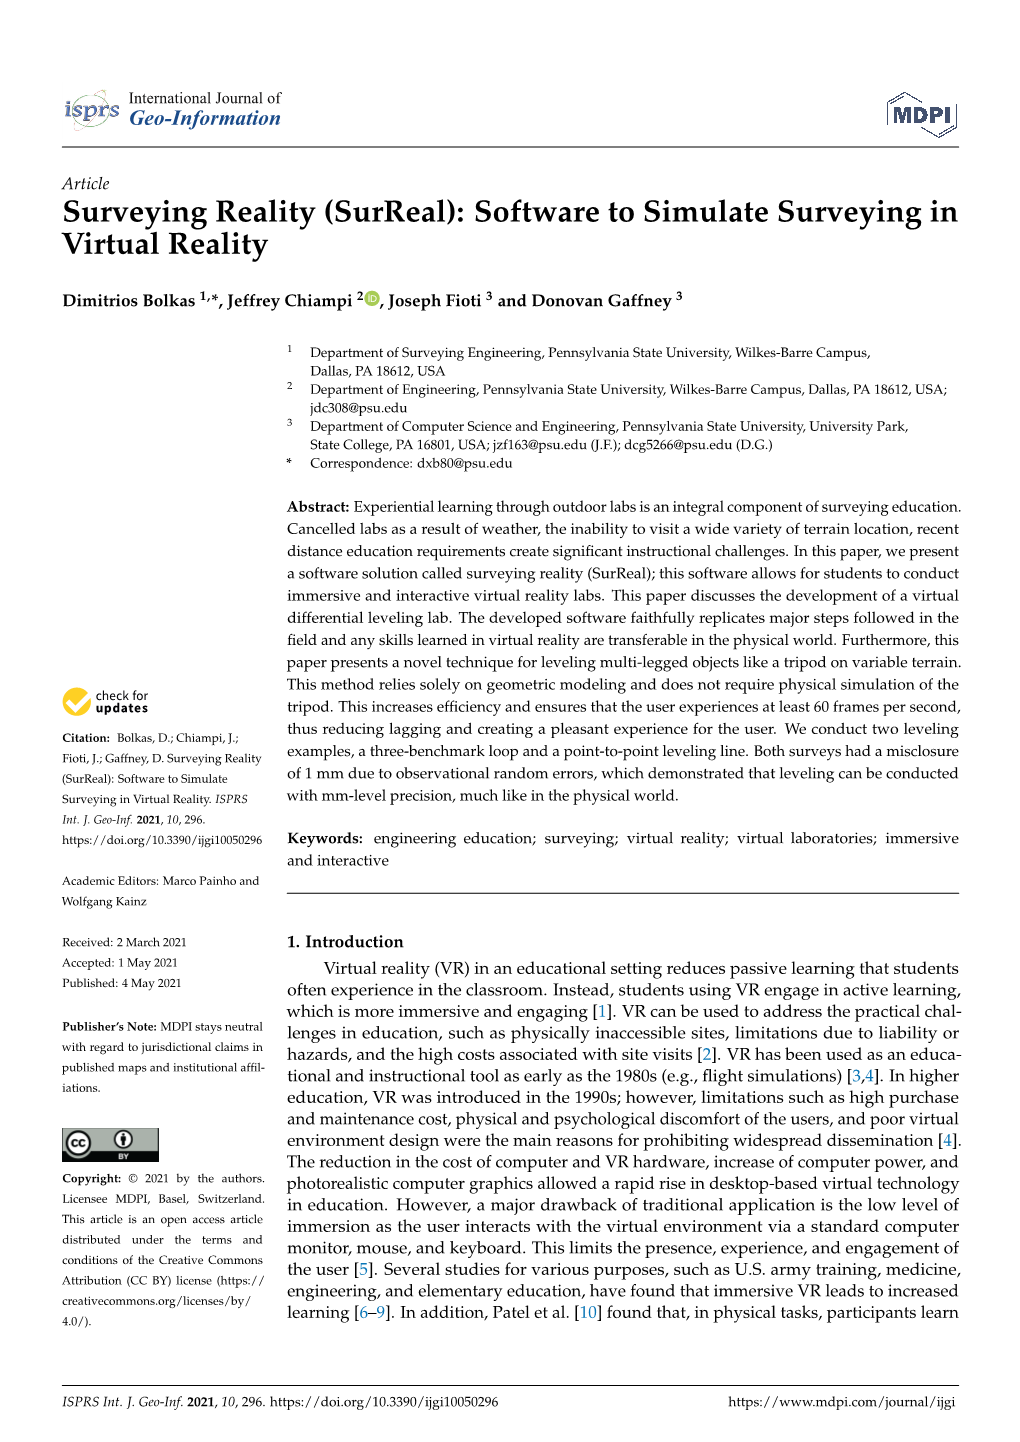 (Surreal): Software to Simulate Surveying in Virtual Reality